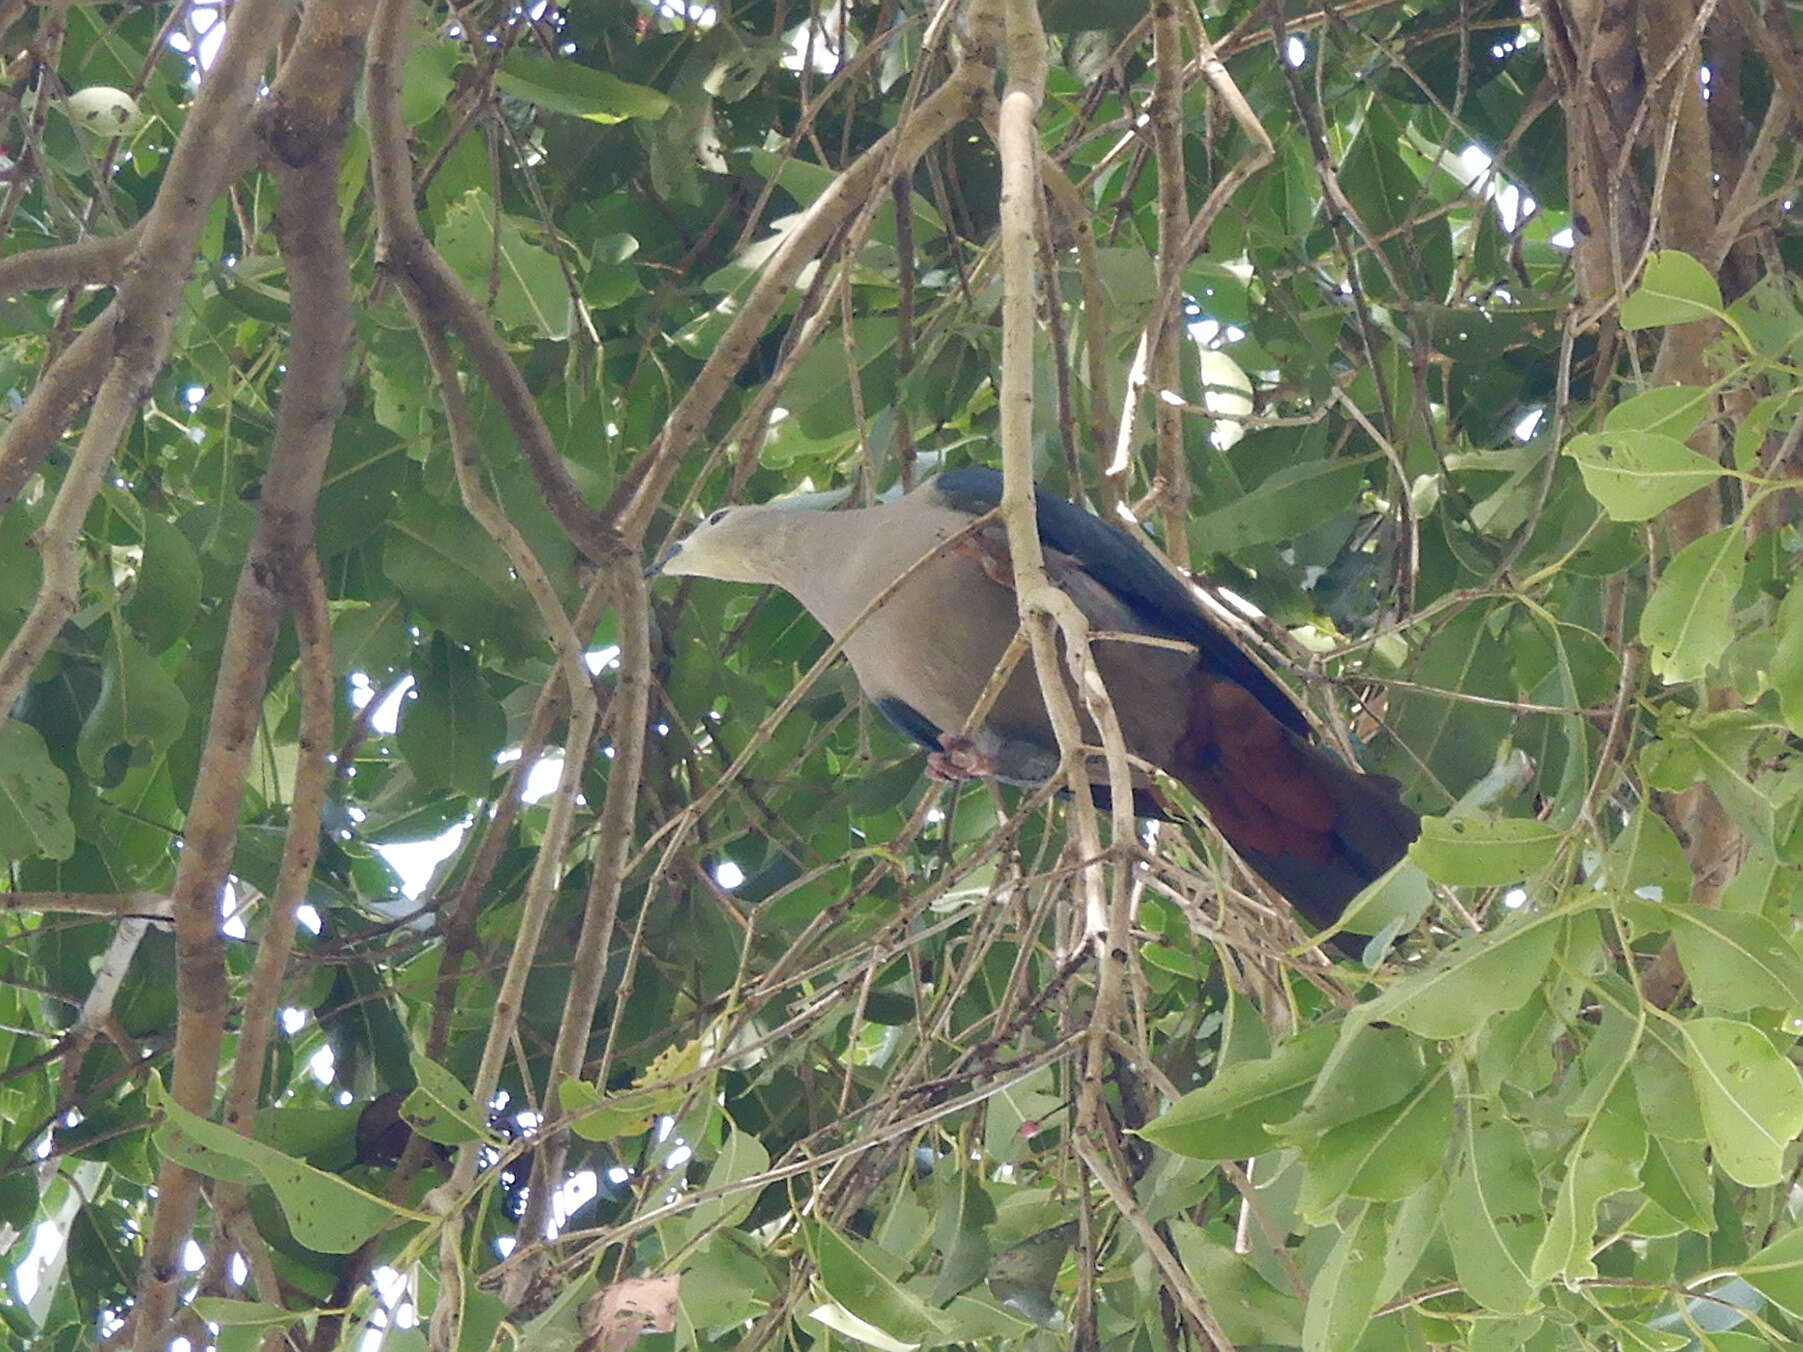 Image of Pacific Imperial Pigeon